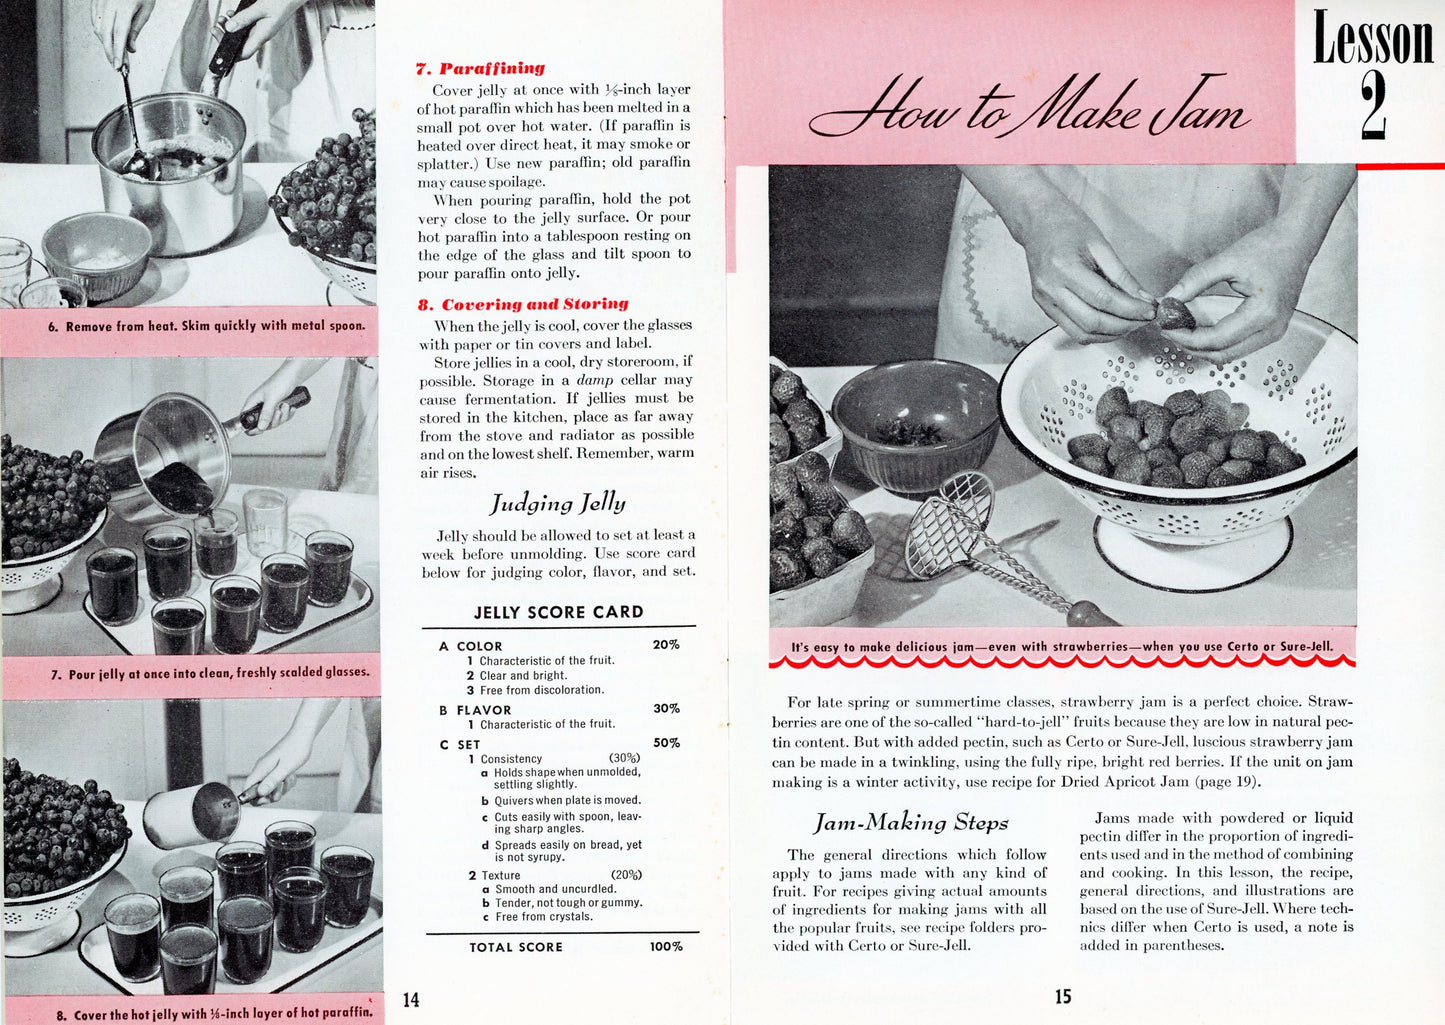 WHAT MAKES JELLY "JELL"? Vintage Recipe Booklet Published by General Foods Corporation ©1945